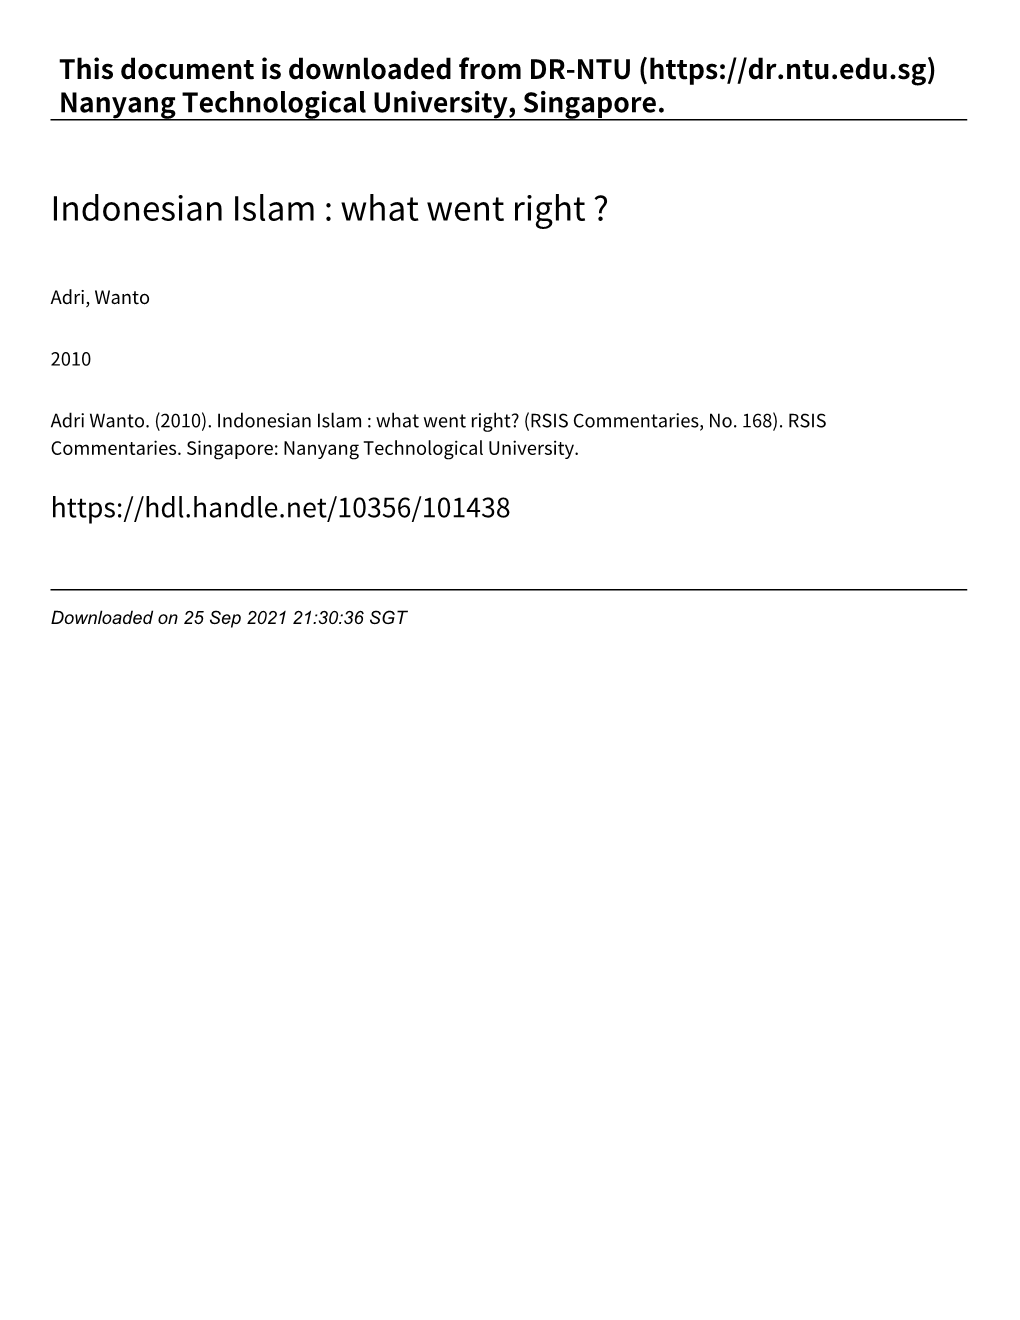 Indonesian Islam : What Went Right ?